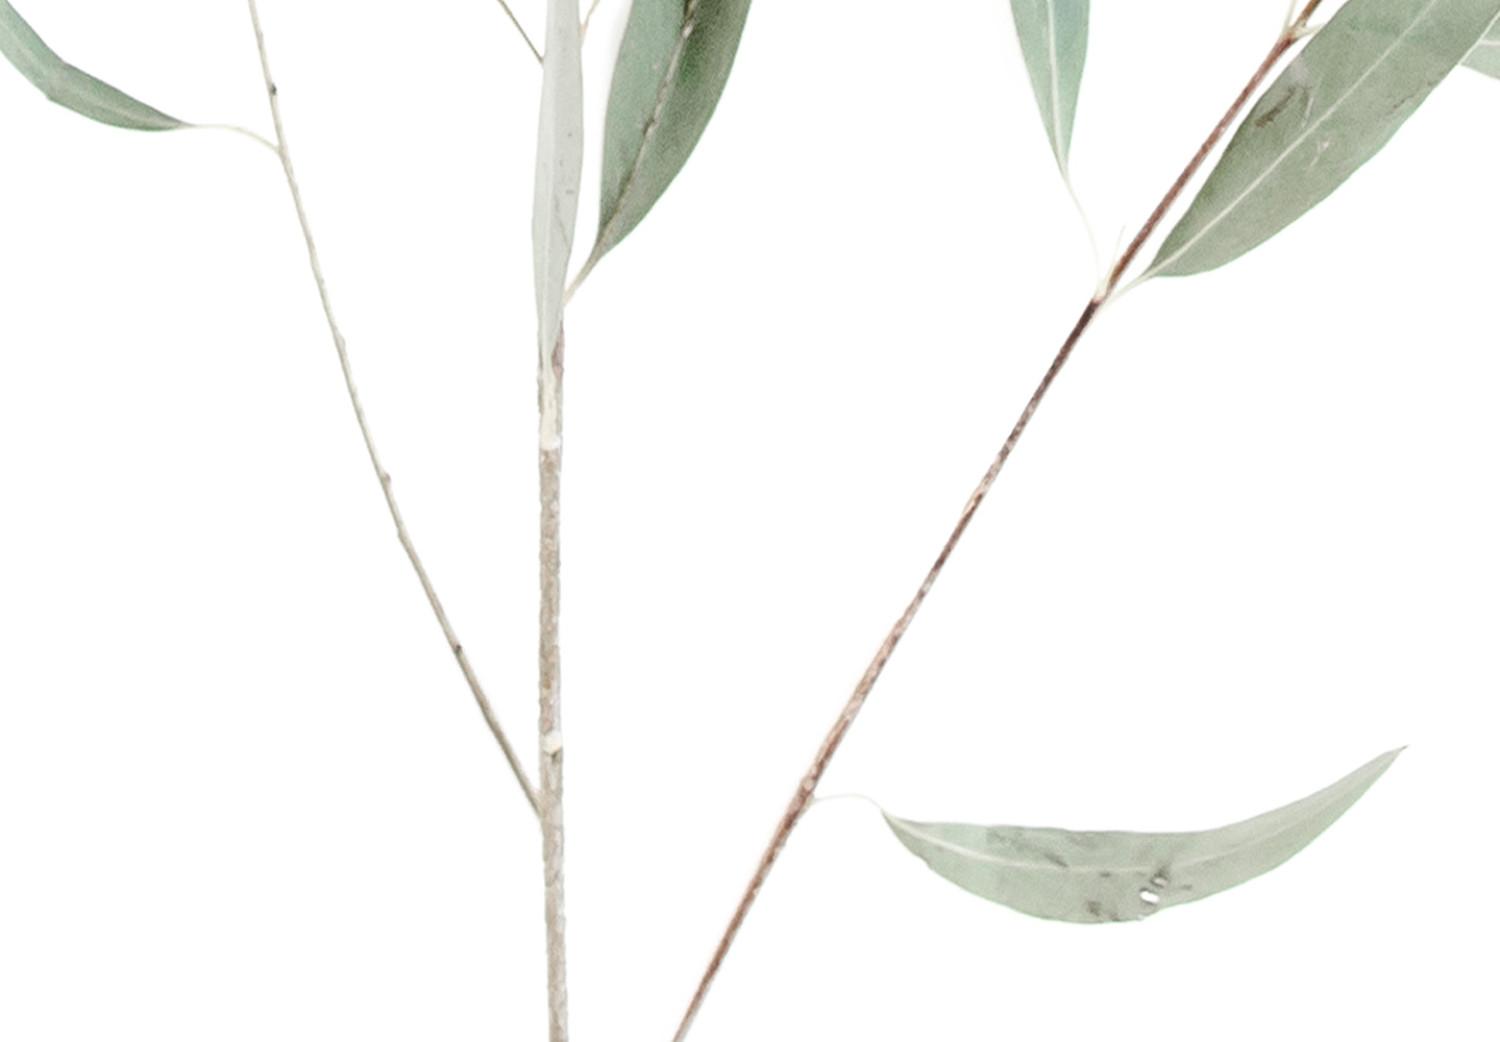 Poster Eucalyptus Nicholii - minimalist composition with green leaves